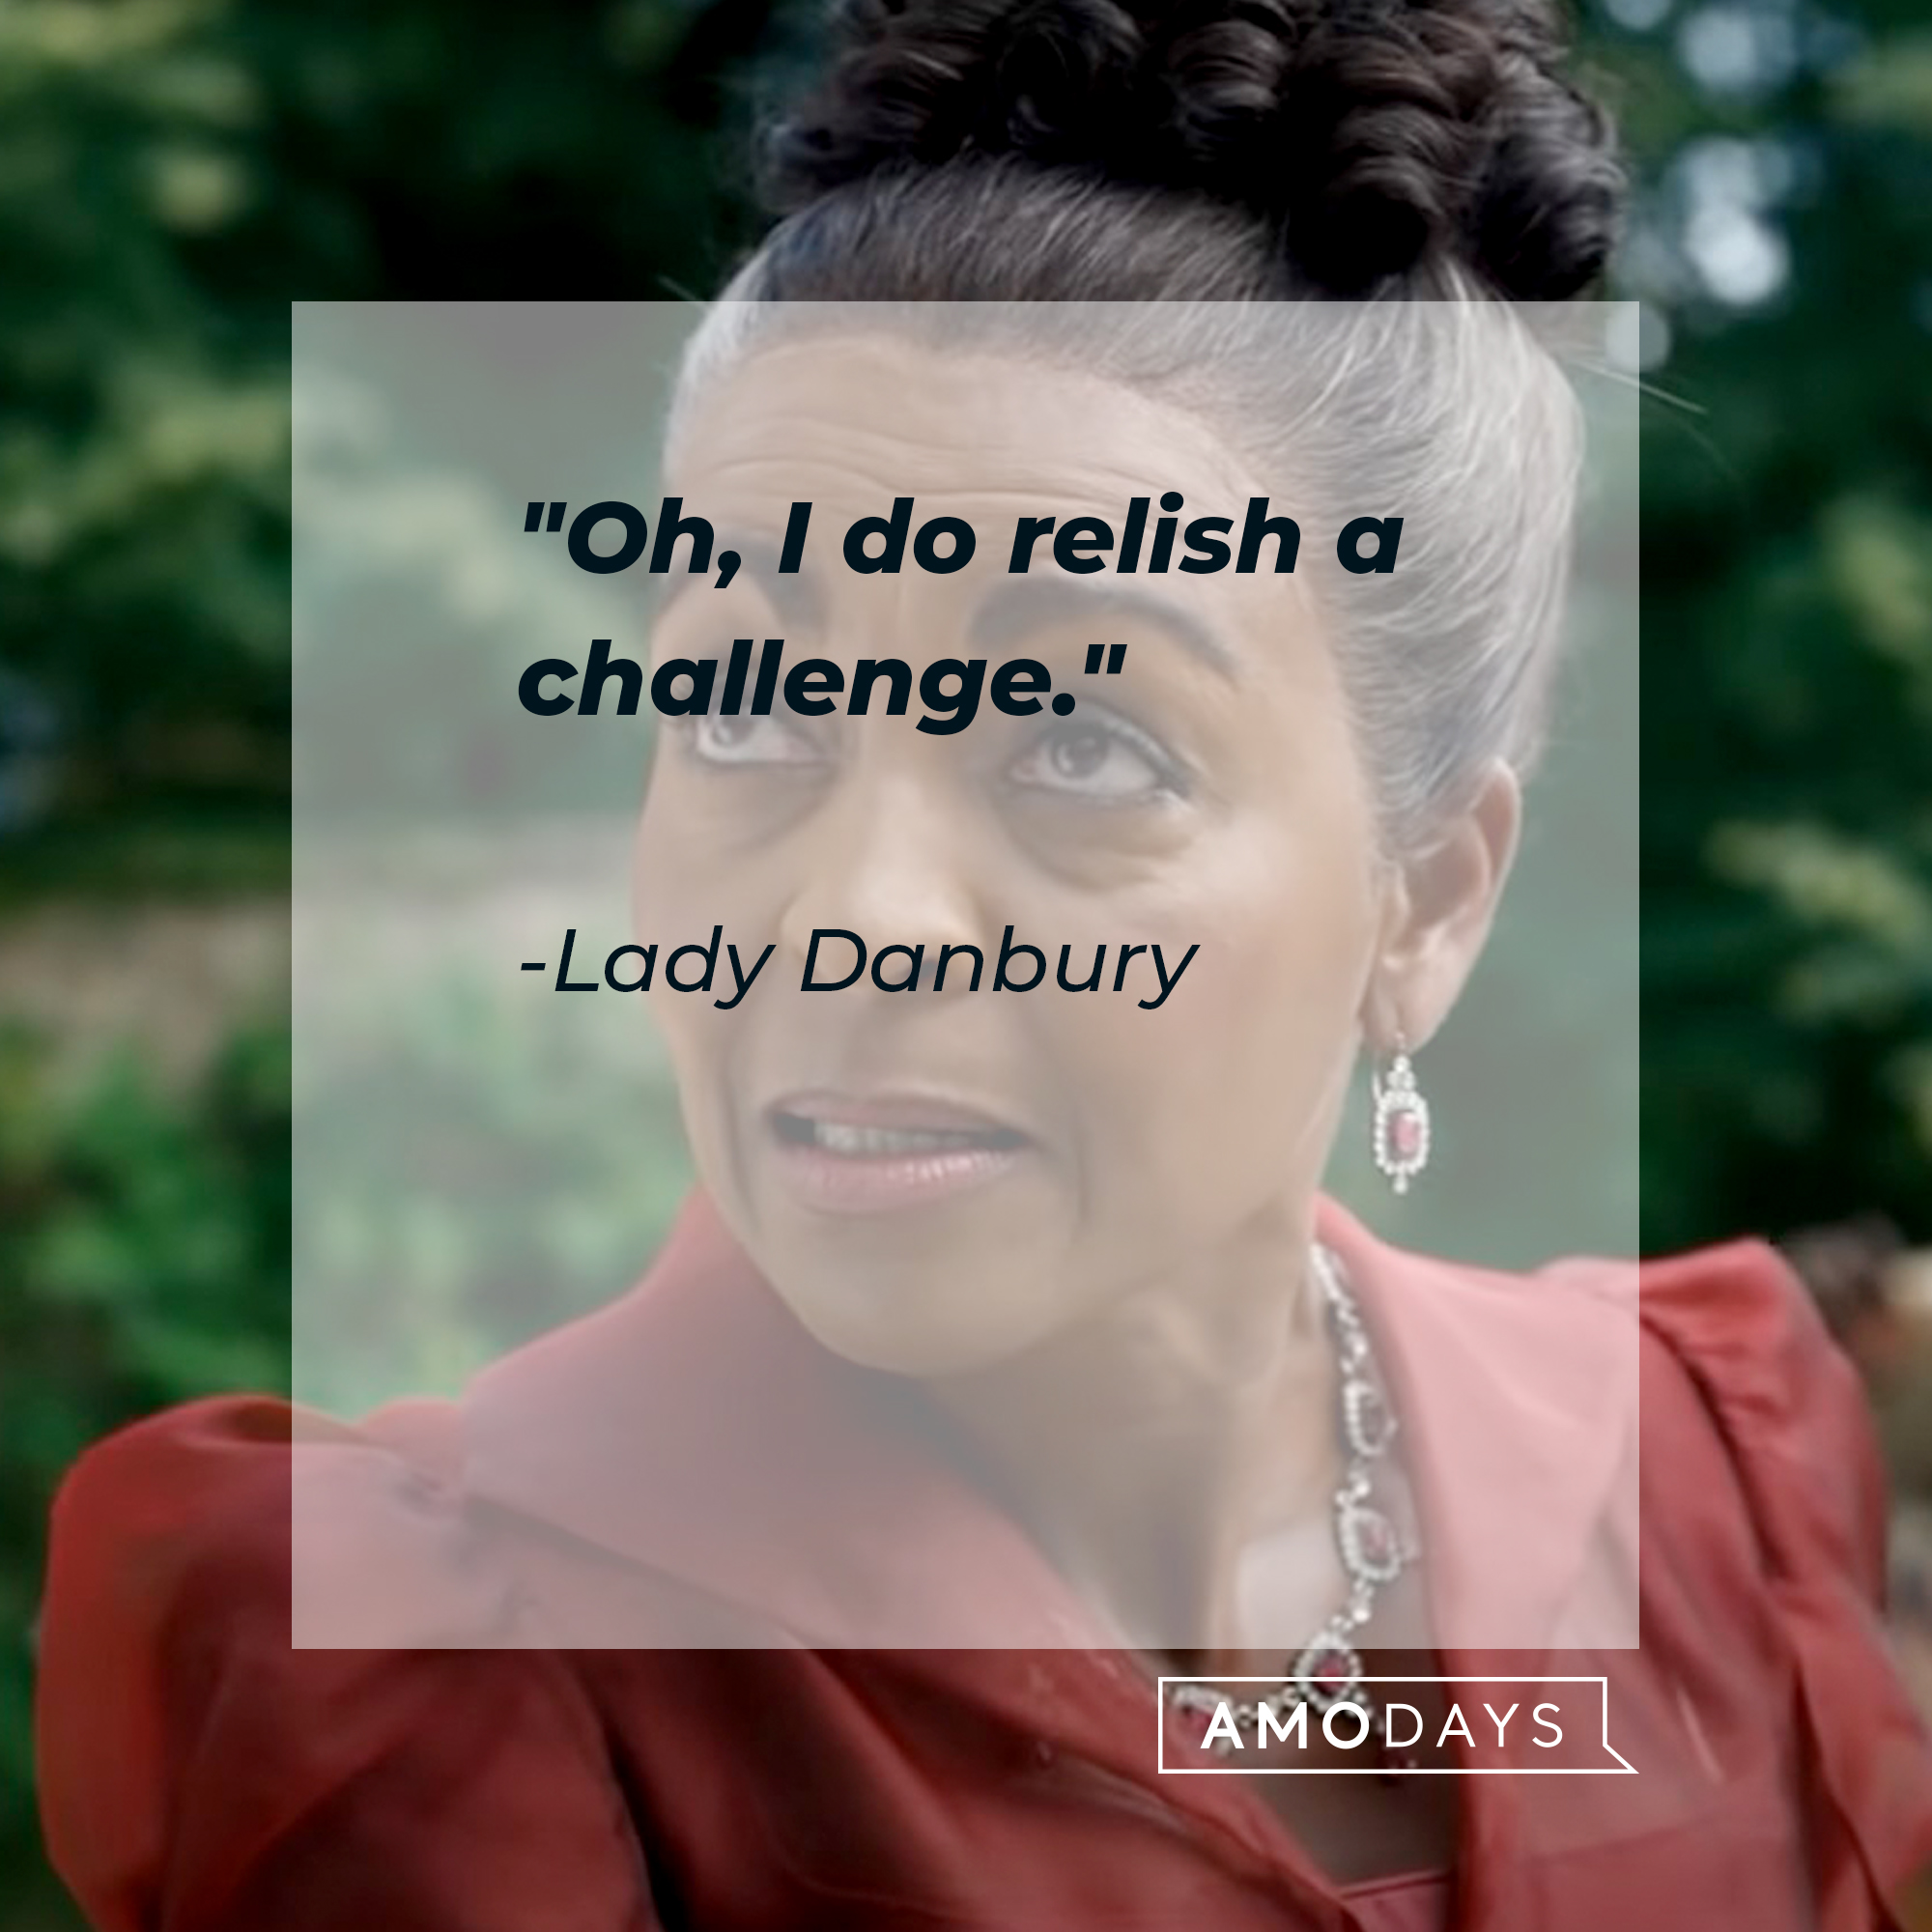 An image of Lady Danbury with her  quote: "Oh, I do relish a challenge.” │Source: youtube.com/Netflix